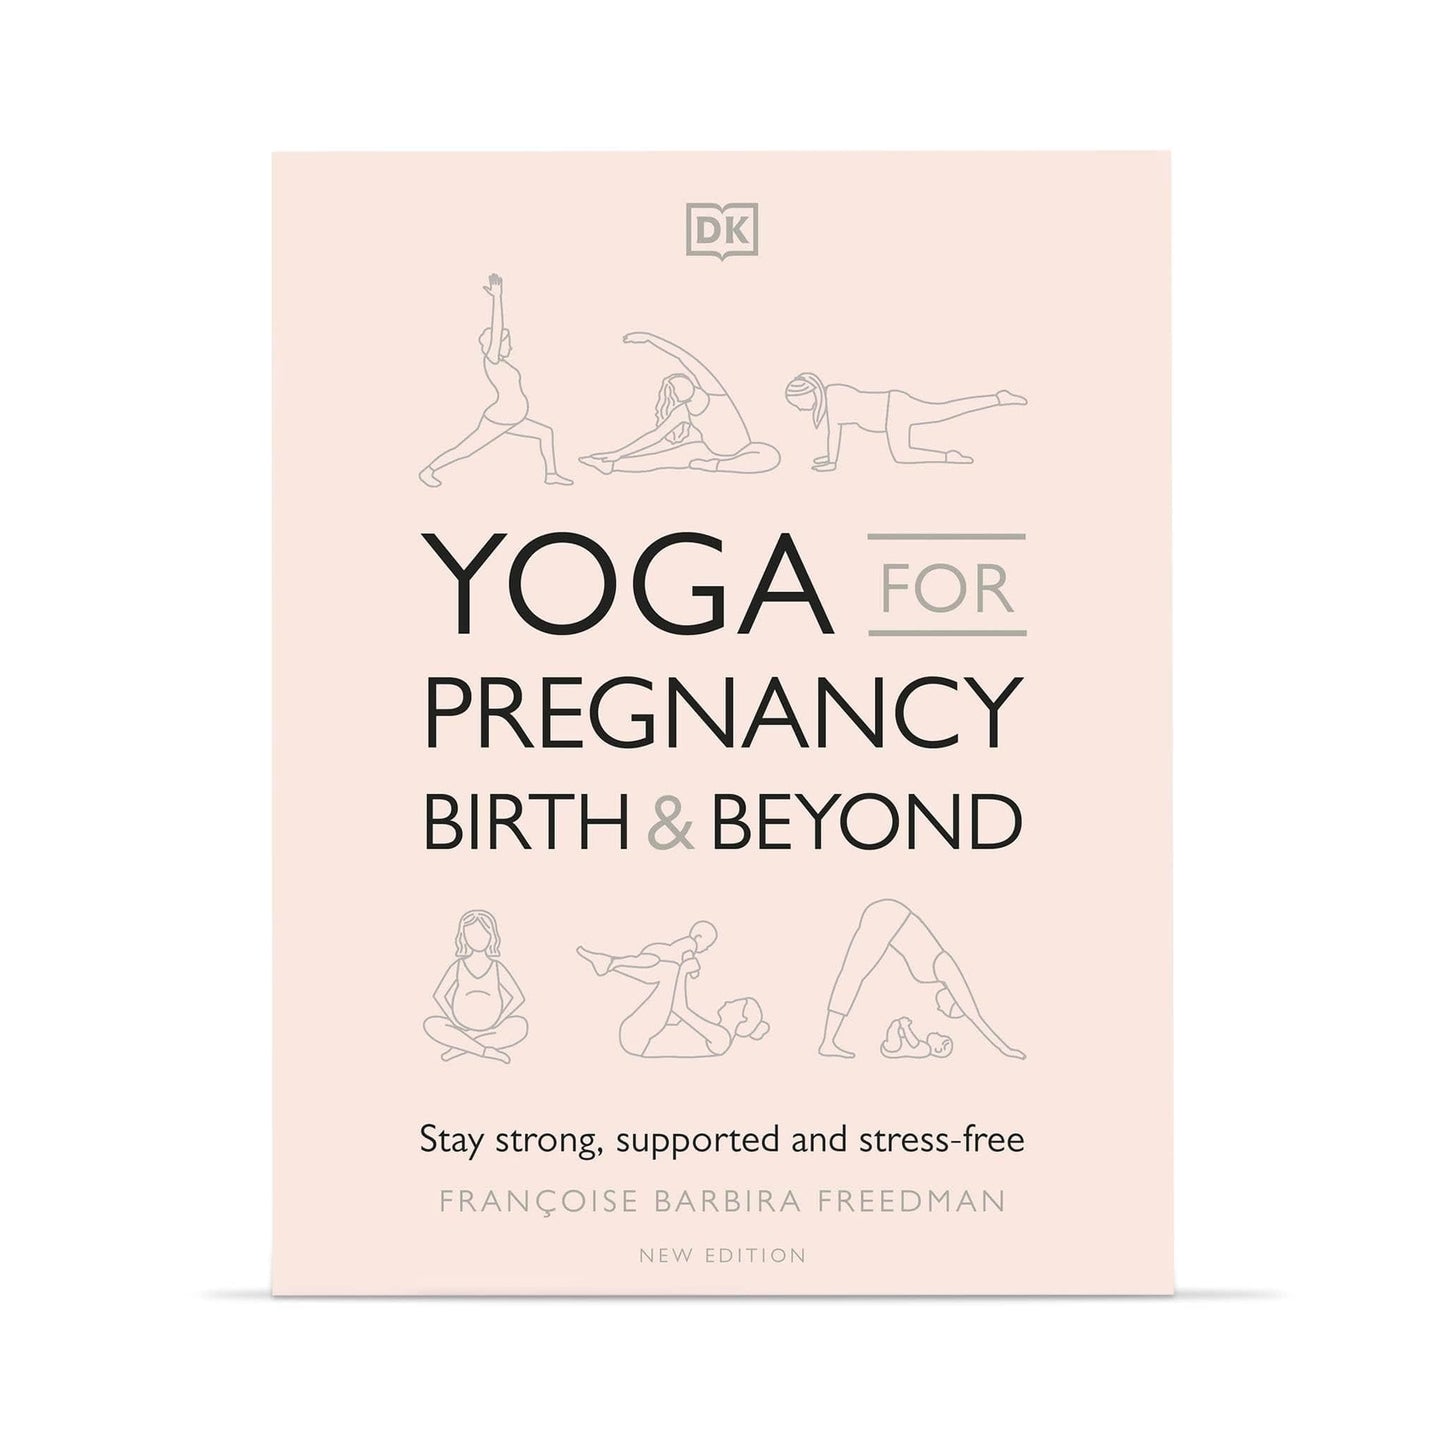 Our Bookshelf Print Books Yoga for Pregnancy, Birth & Beyond - Stay strong, supported and stress free - Francoise Barbira Freedman